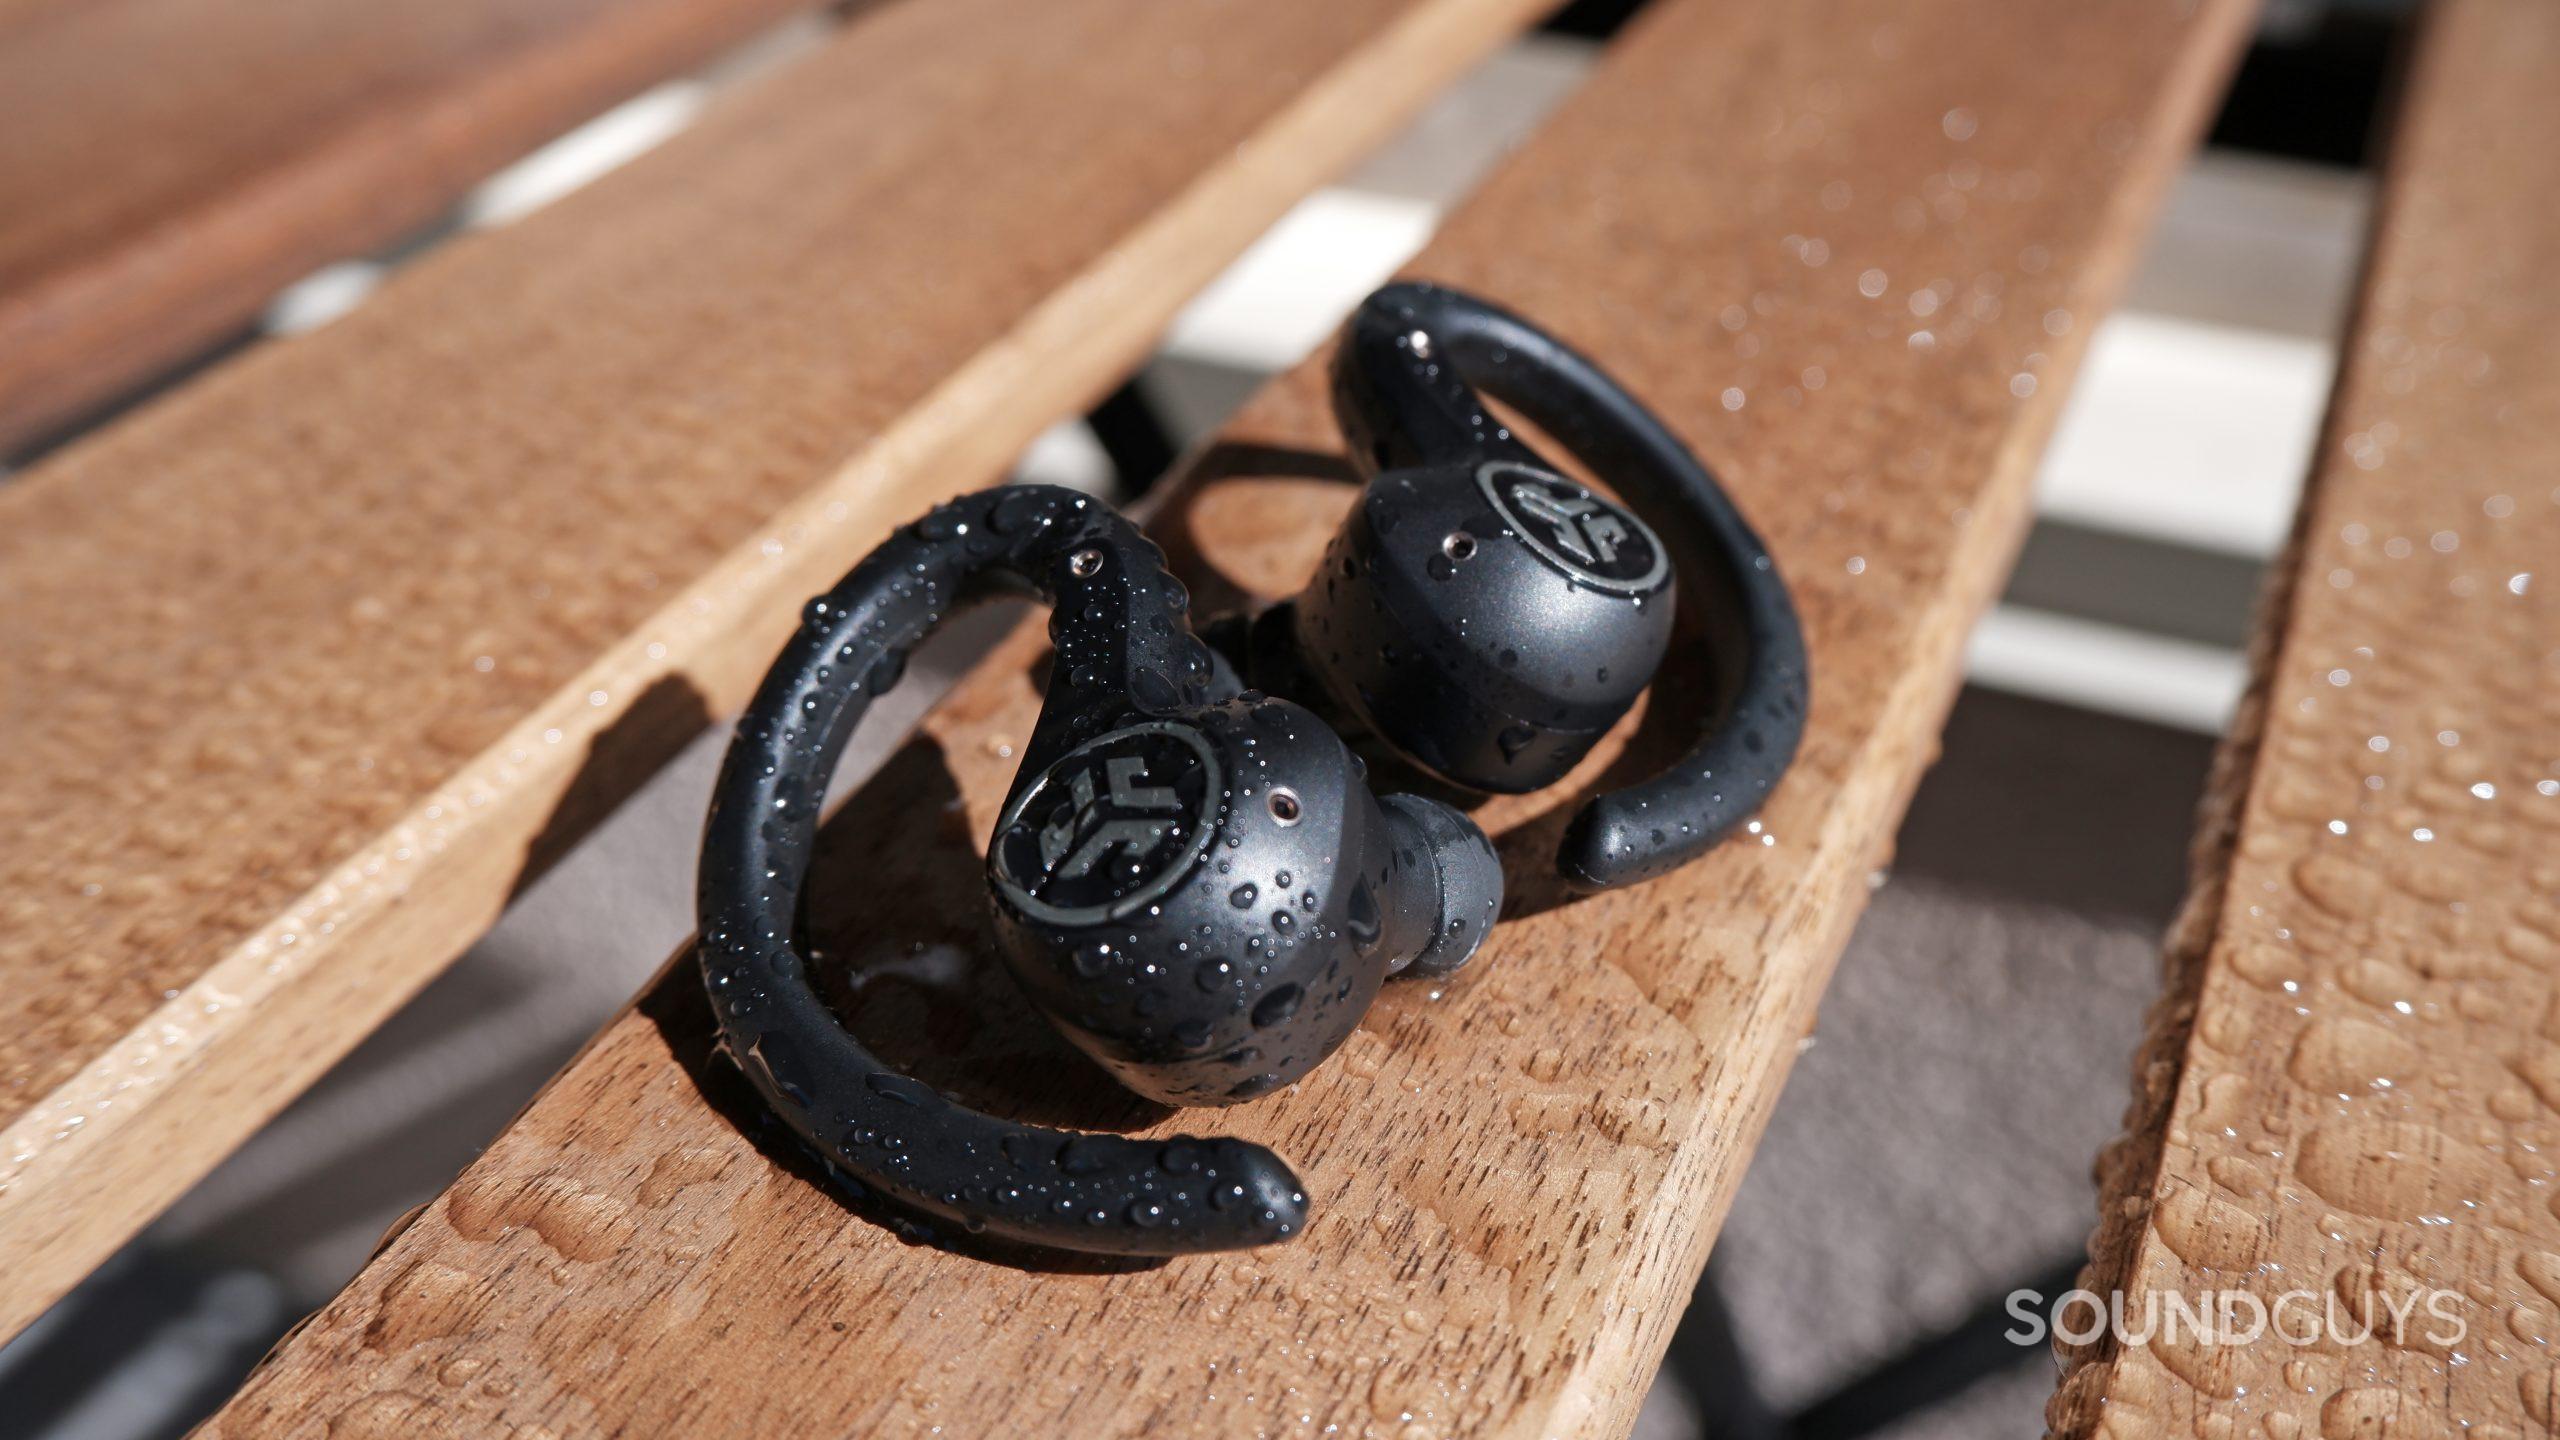 JLab Epic Air Sport Review: Better Than Powerbeats For Way Less